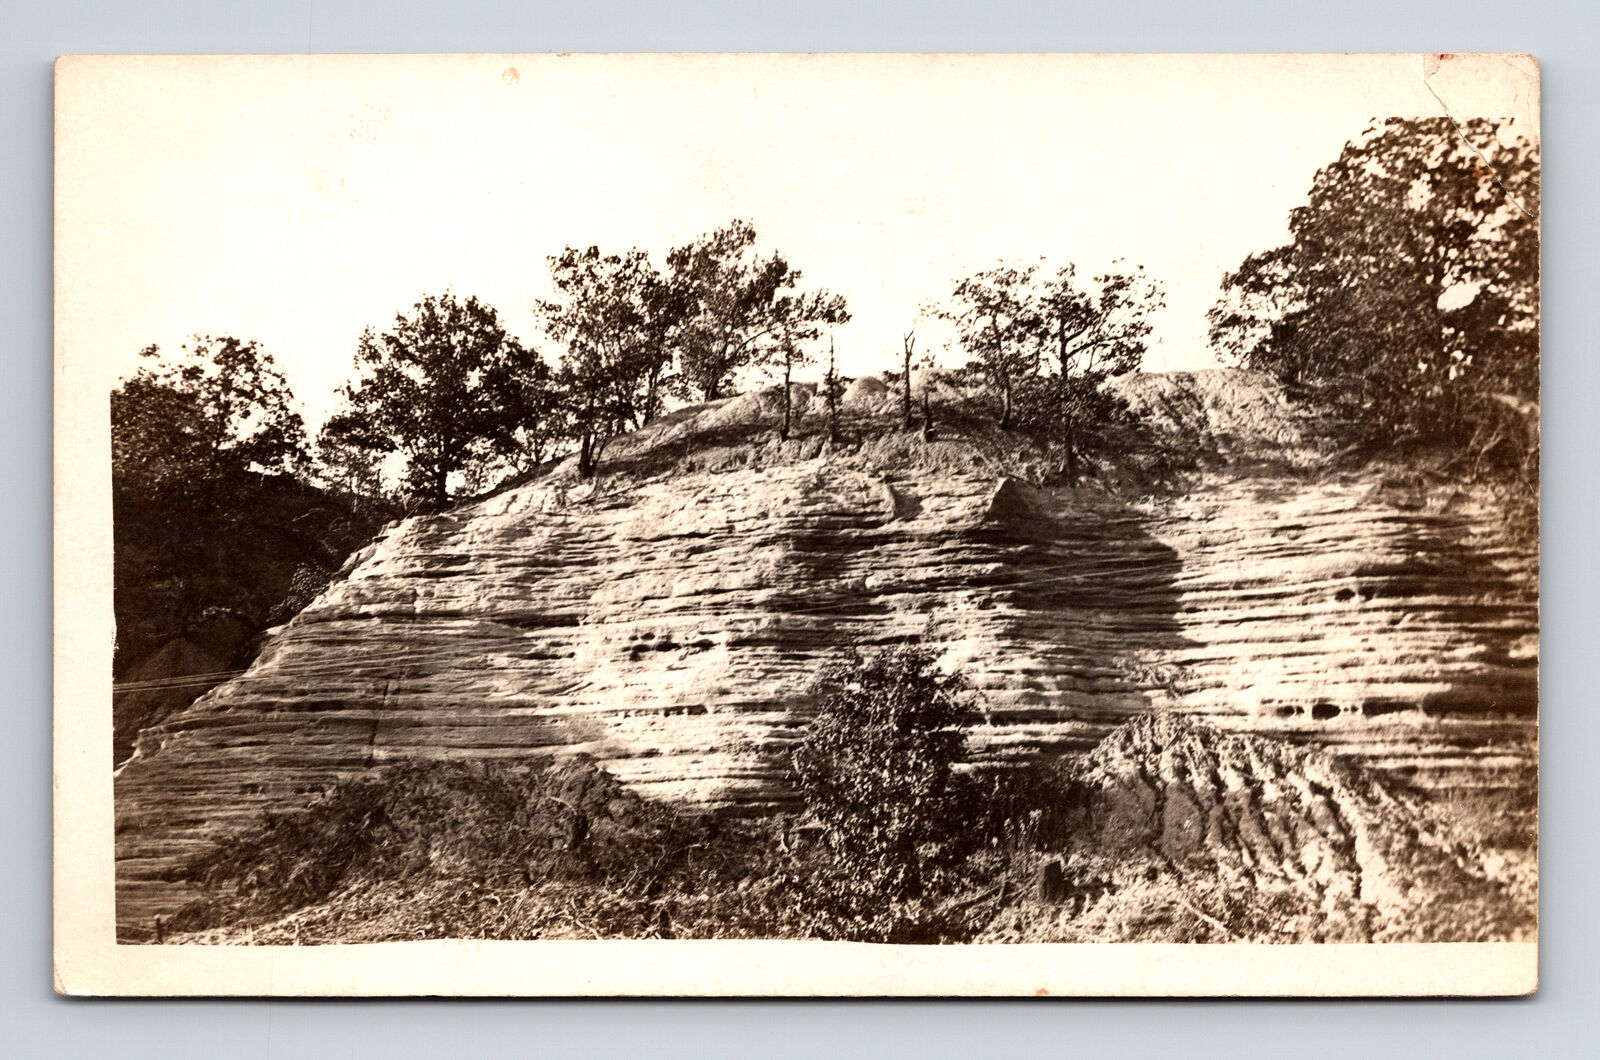 RPPC Stratified Rock Layers Formation Unknown Location Real Photo Postcard